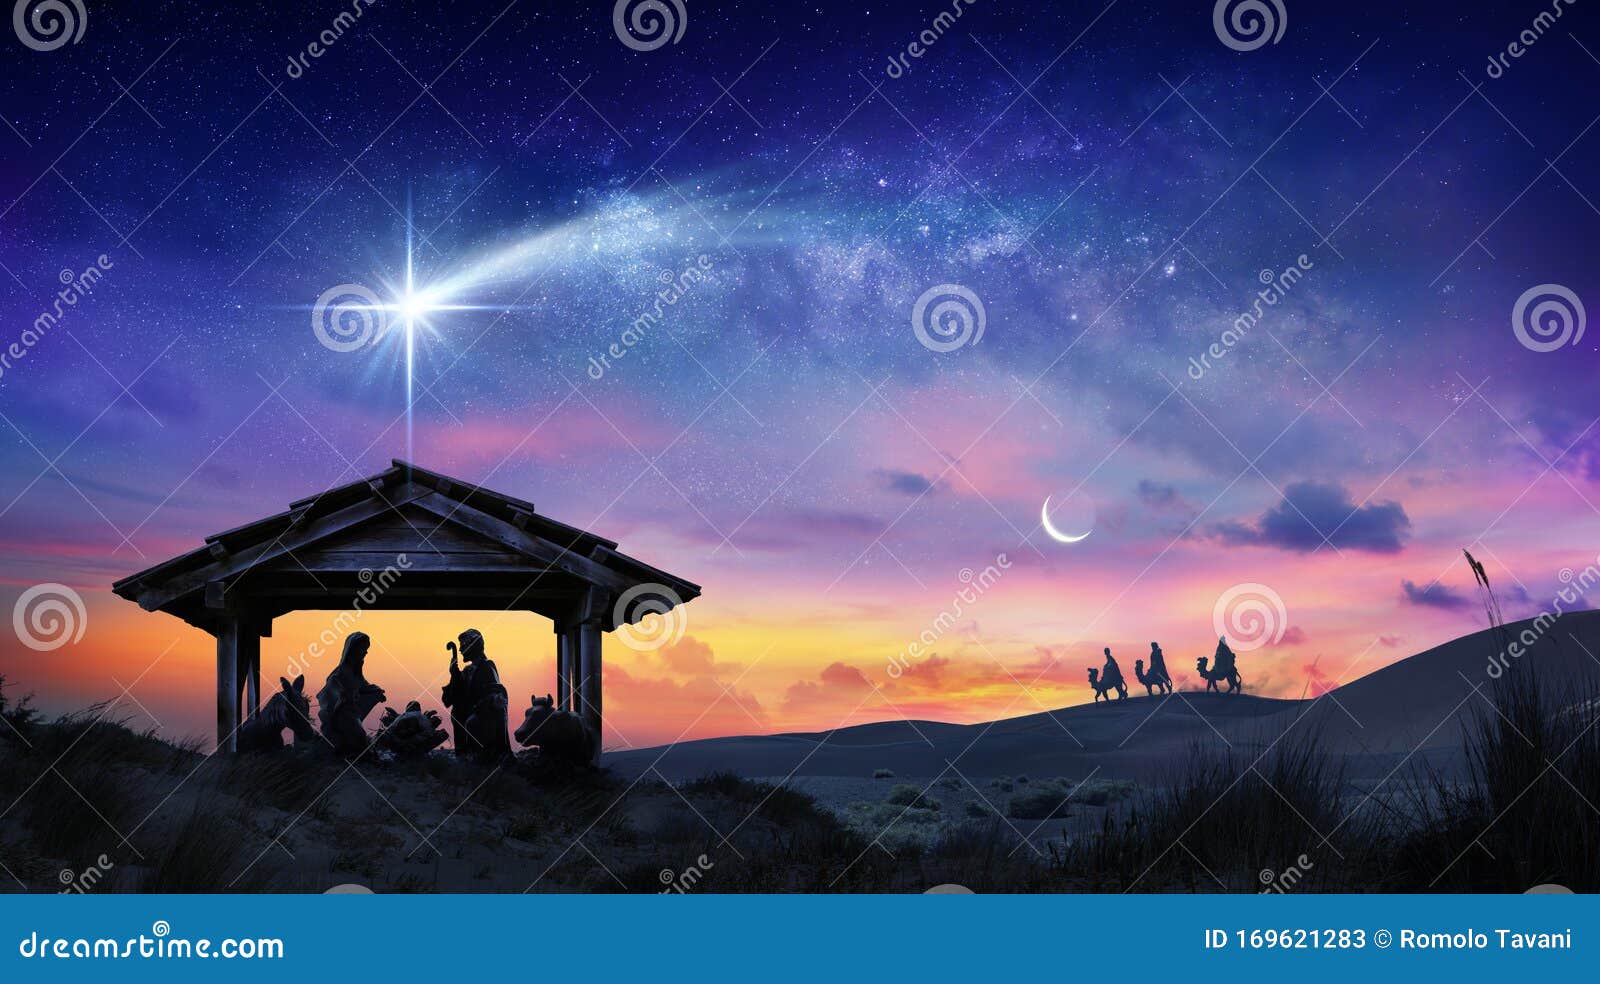 nativity of jesus scene with the holy family